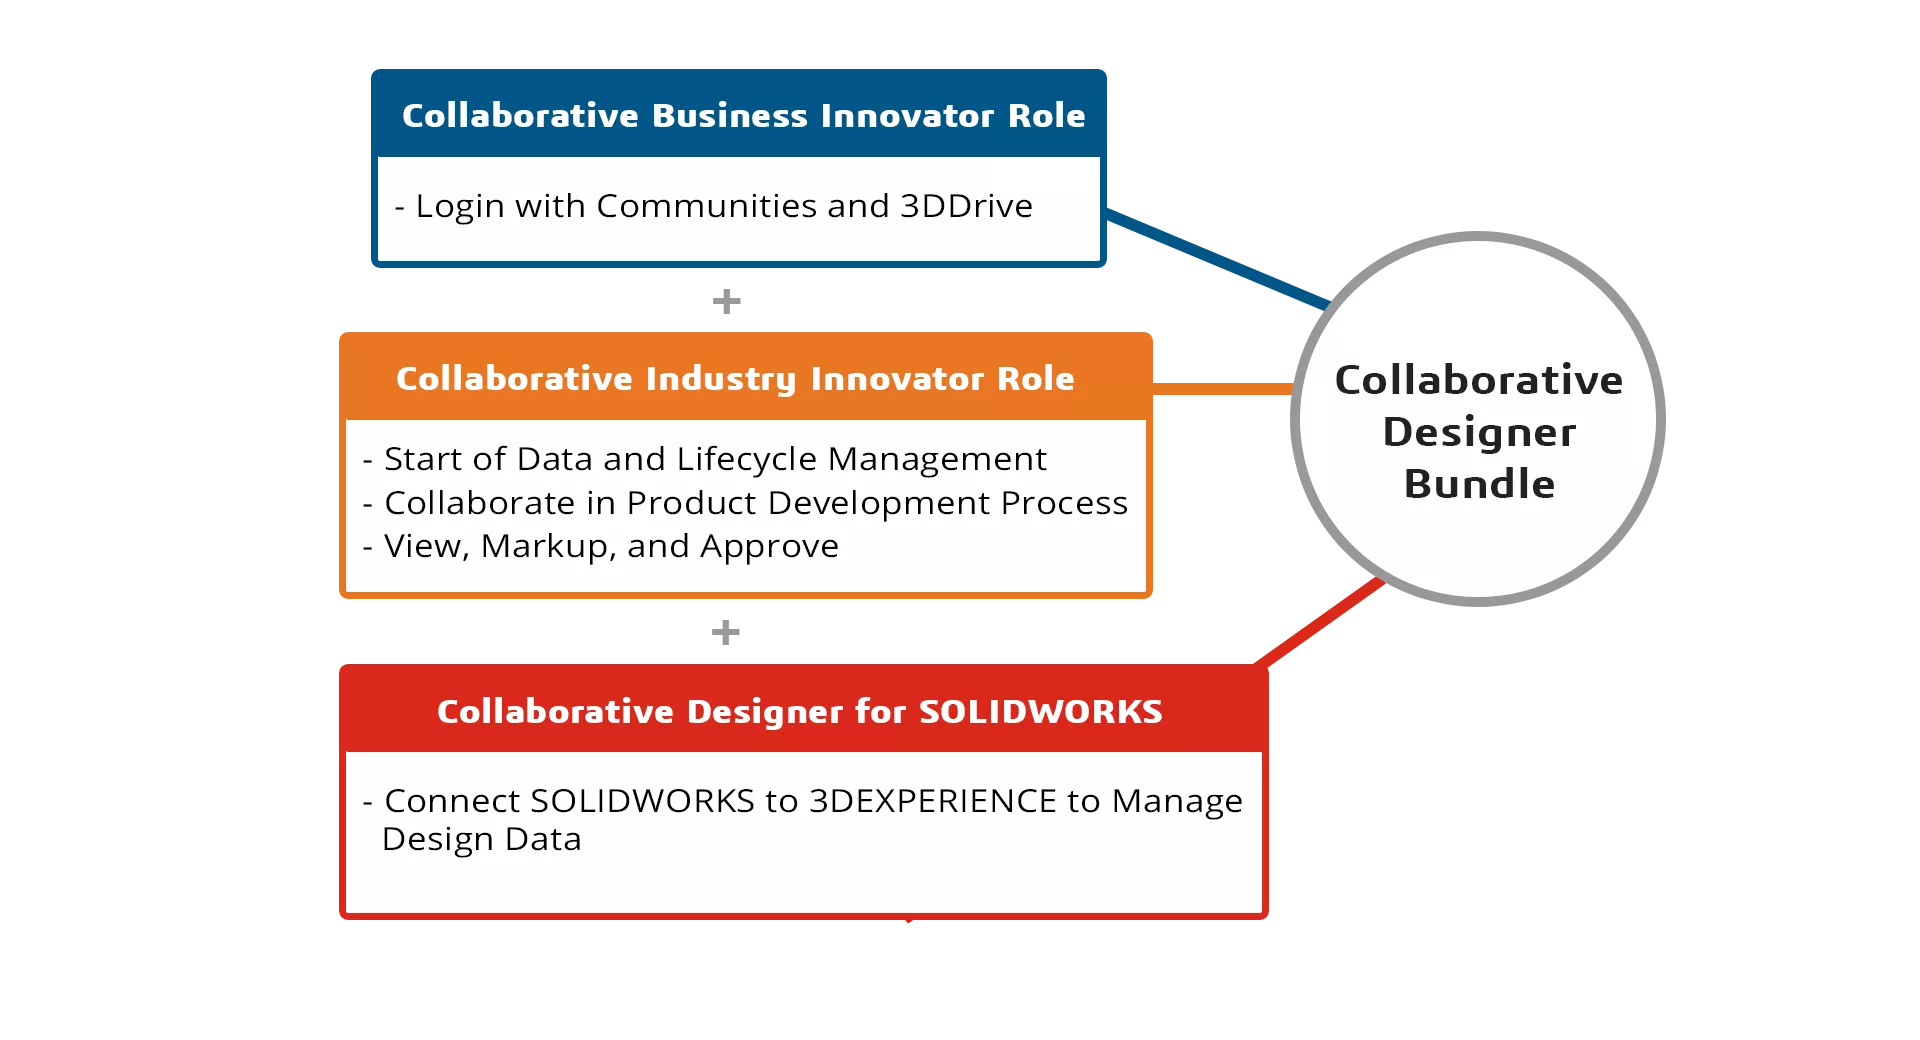 Get Pricing on the 3DEXPERIENCE Collaborative Designer Bundle from GoEngineer!